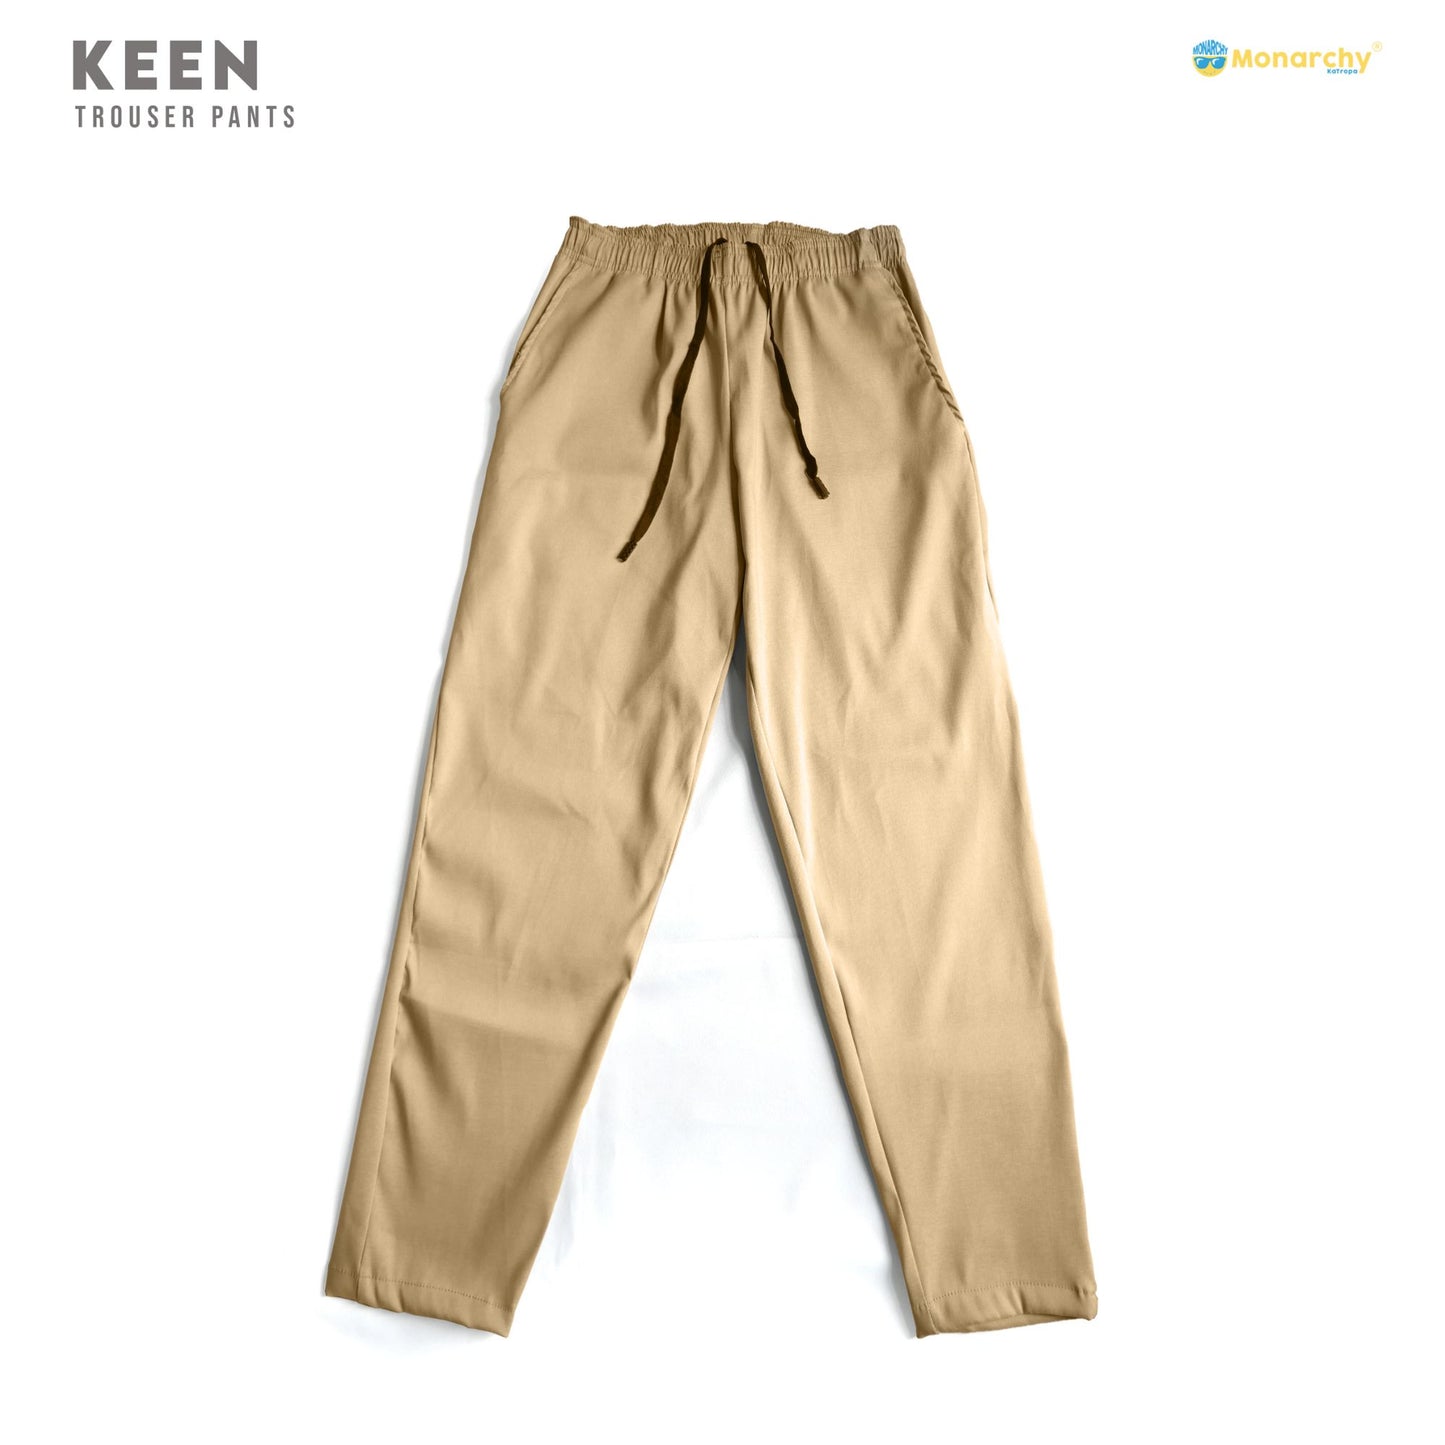 Monarchy Official KEEN Trouser Pants I High Quality Fashion Men’s Stretchable Straight Cut Trouser Pants